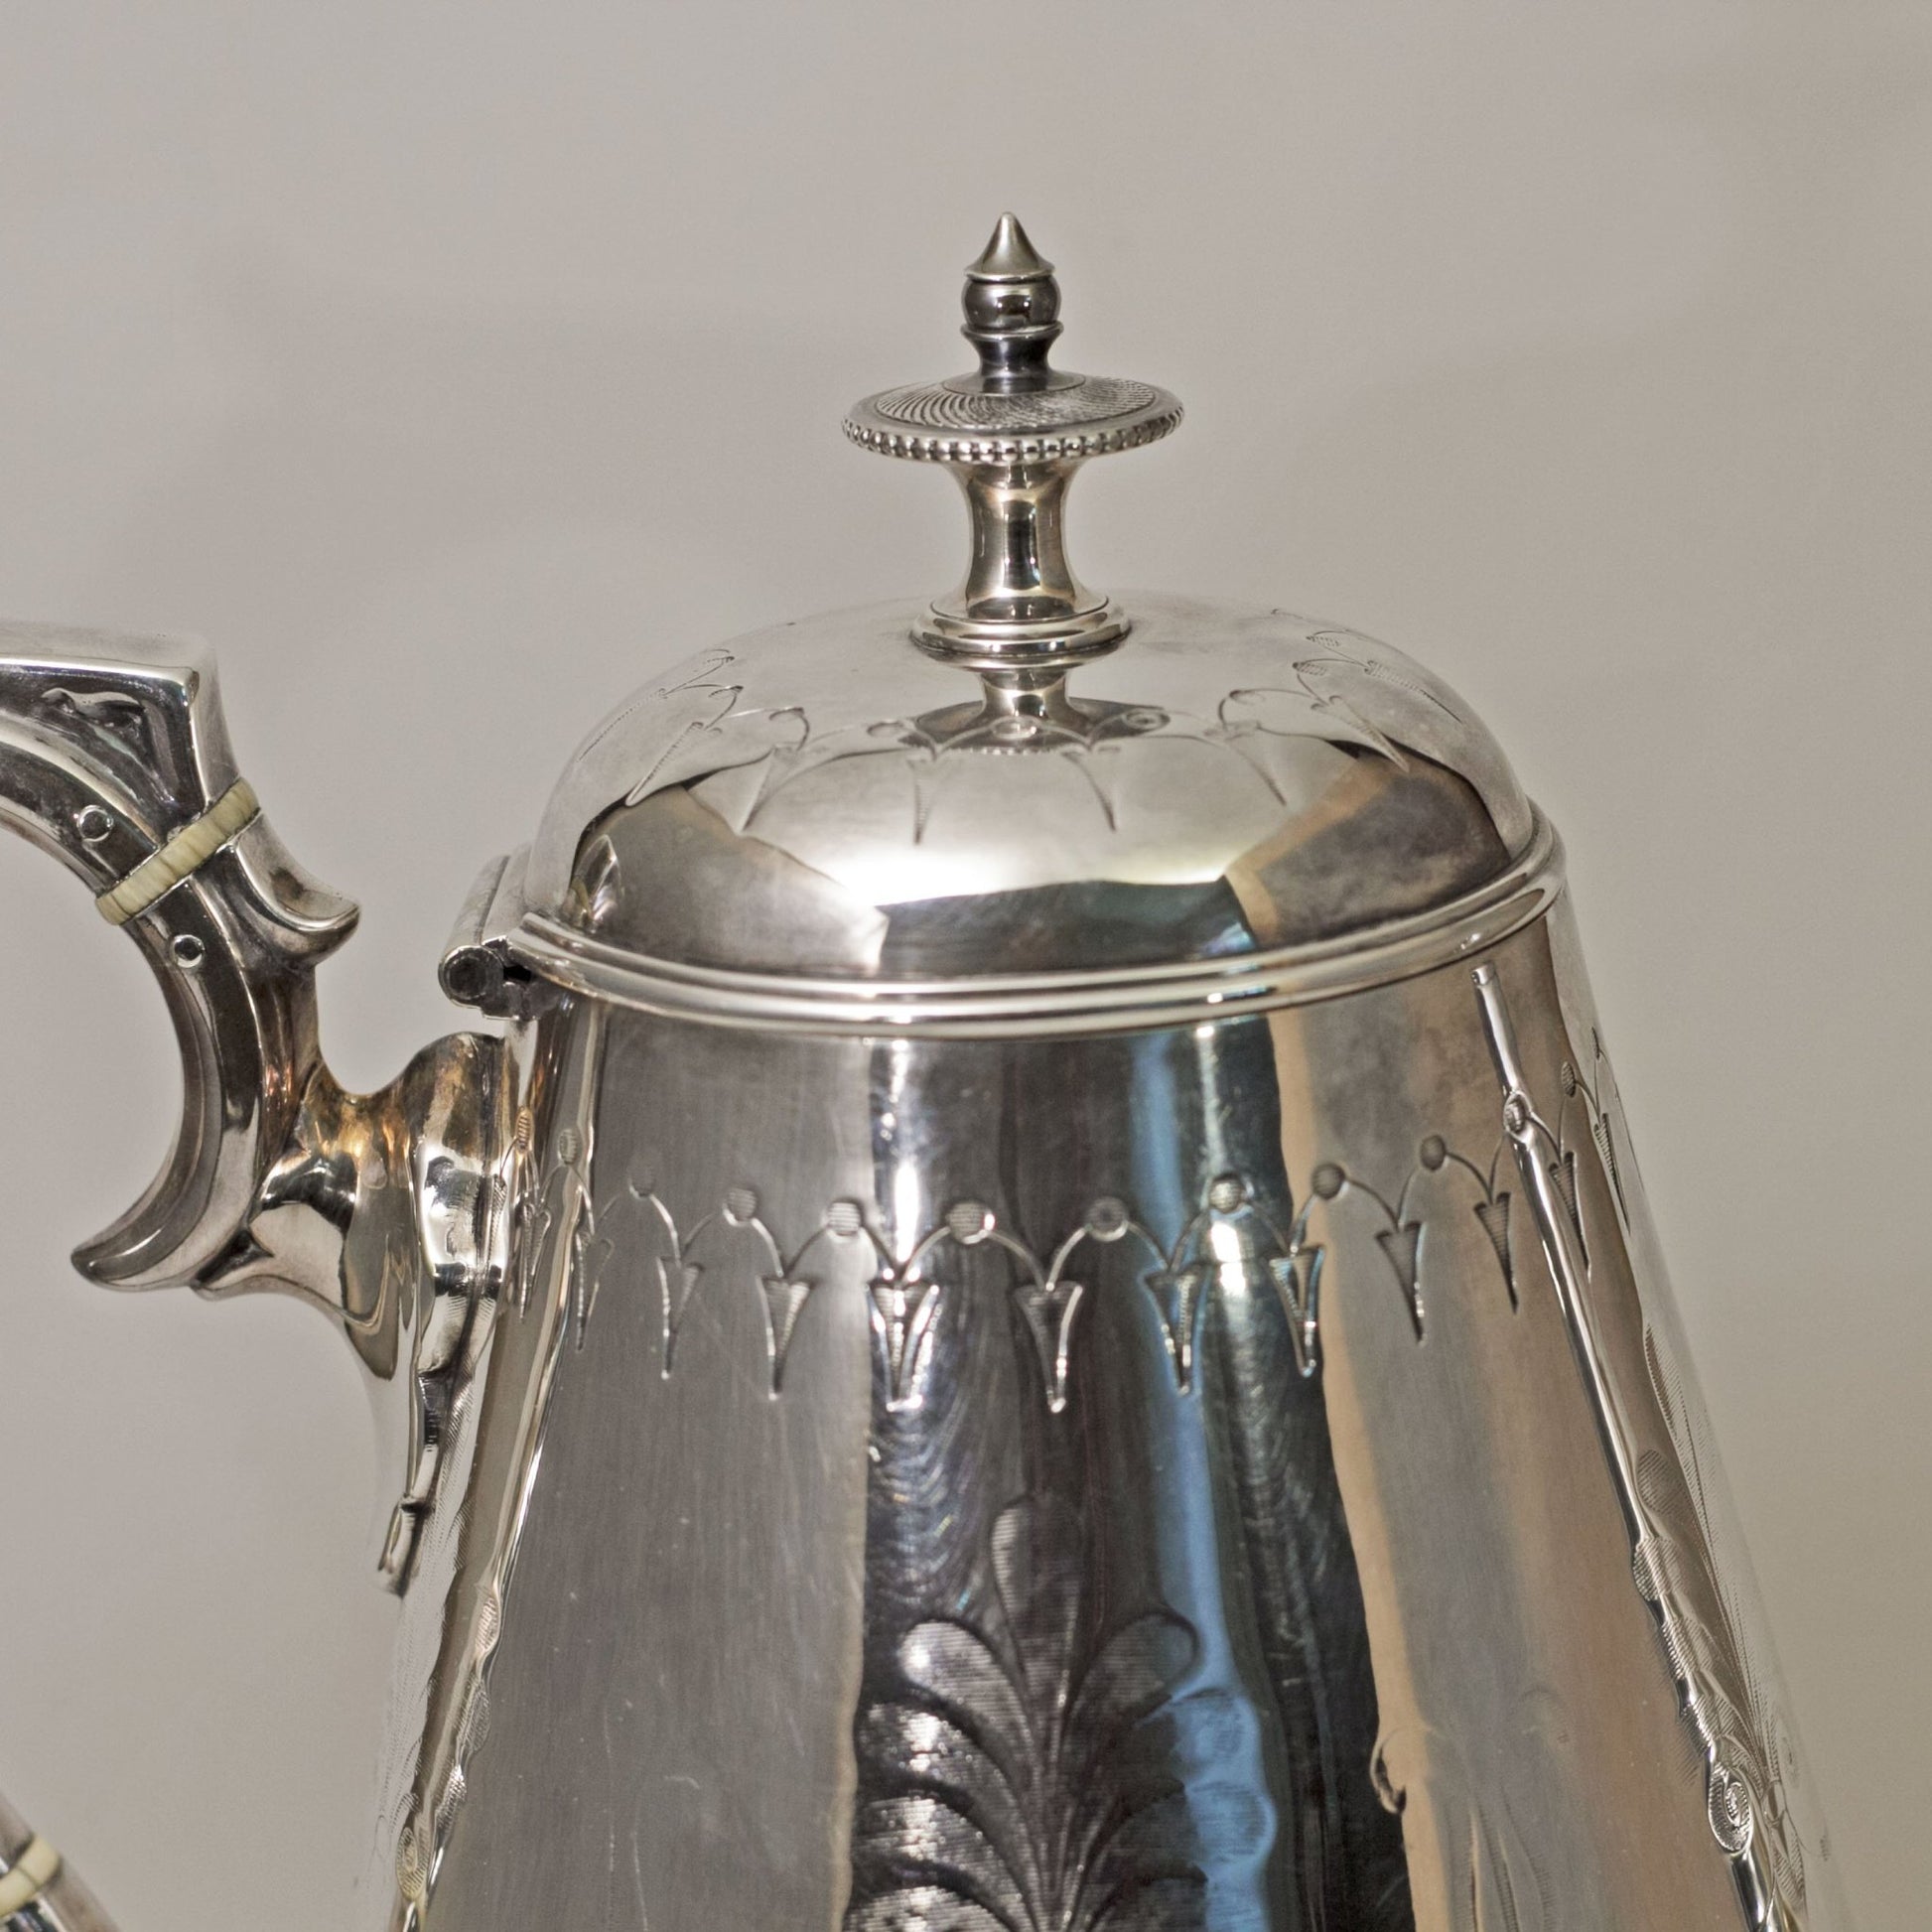 ENGRAVED ELECTROPLATED VICTORIAN COFFEEE POT